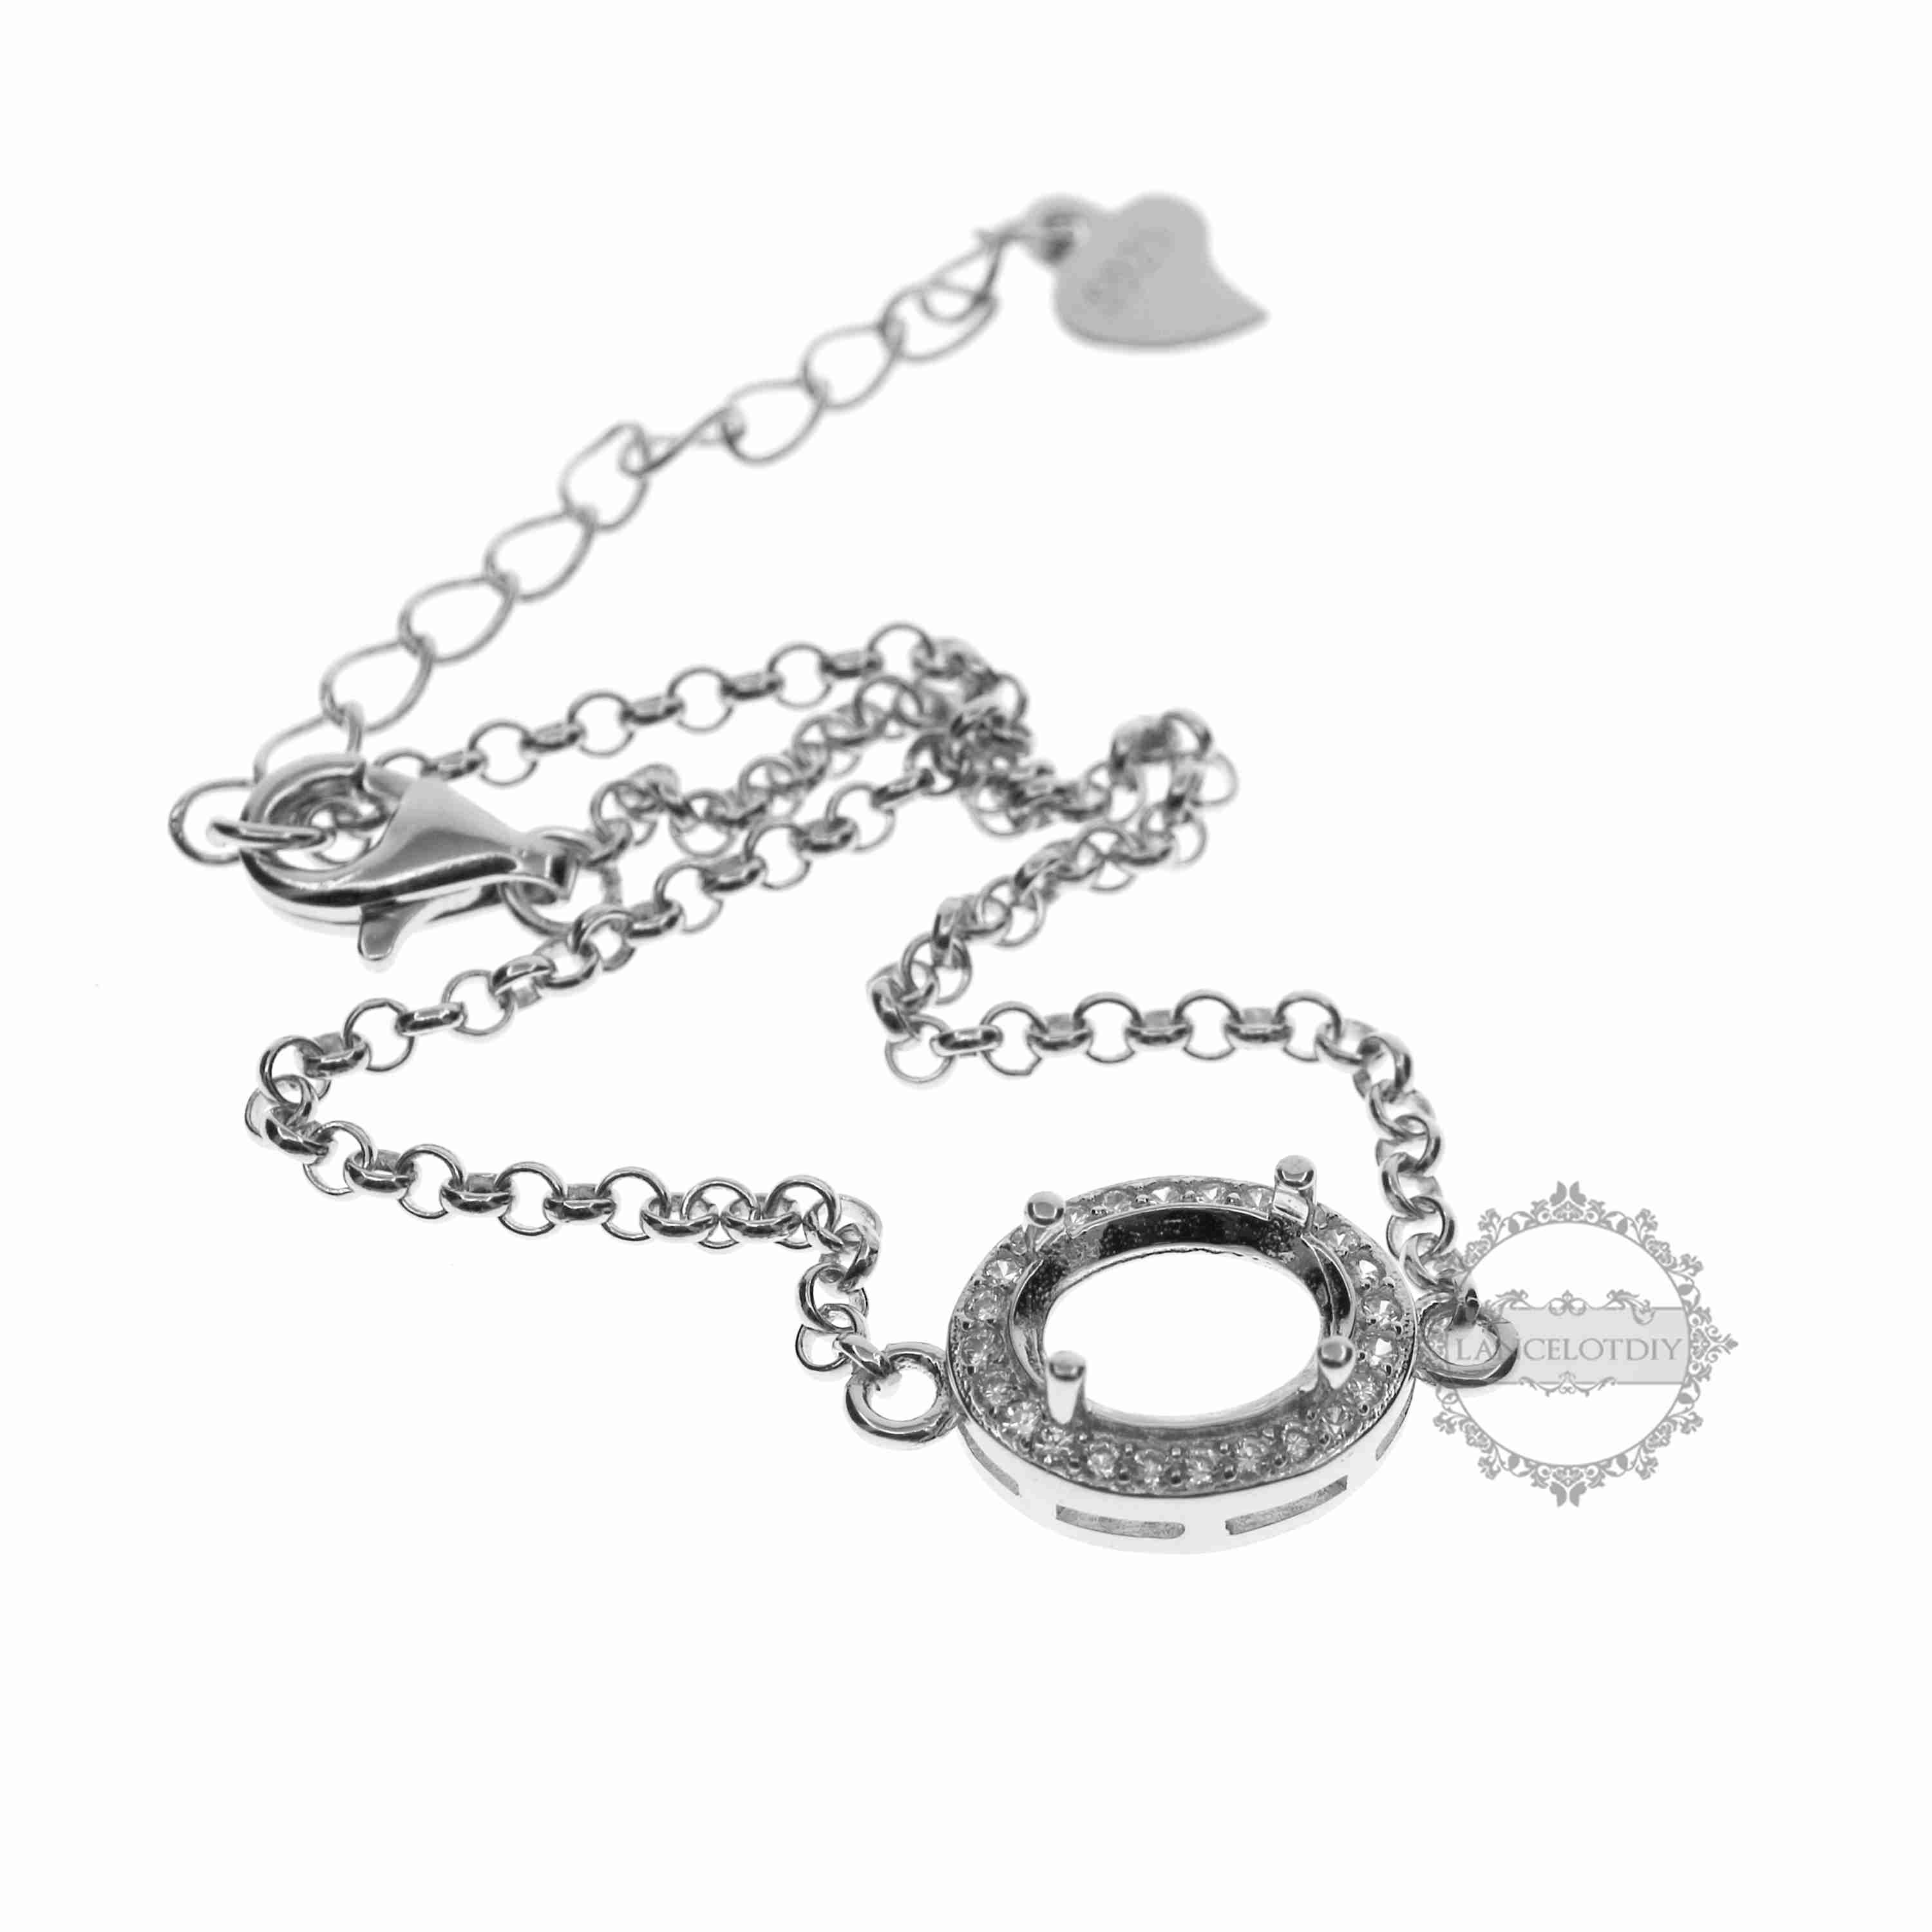 1Pcs 5X7-7X9MM Gems Cz Stone Oval Prong Bezel Settings Solid 925 Sterling Silver DIY Charm Bracelet Tray With 6'' Chain 1900188 - Click Image to Close